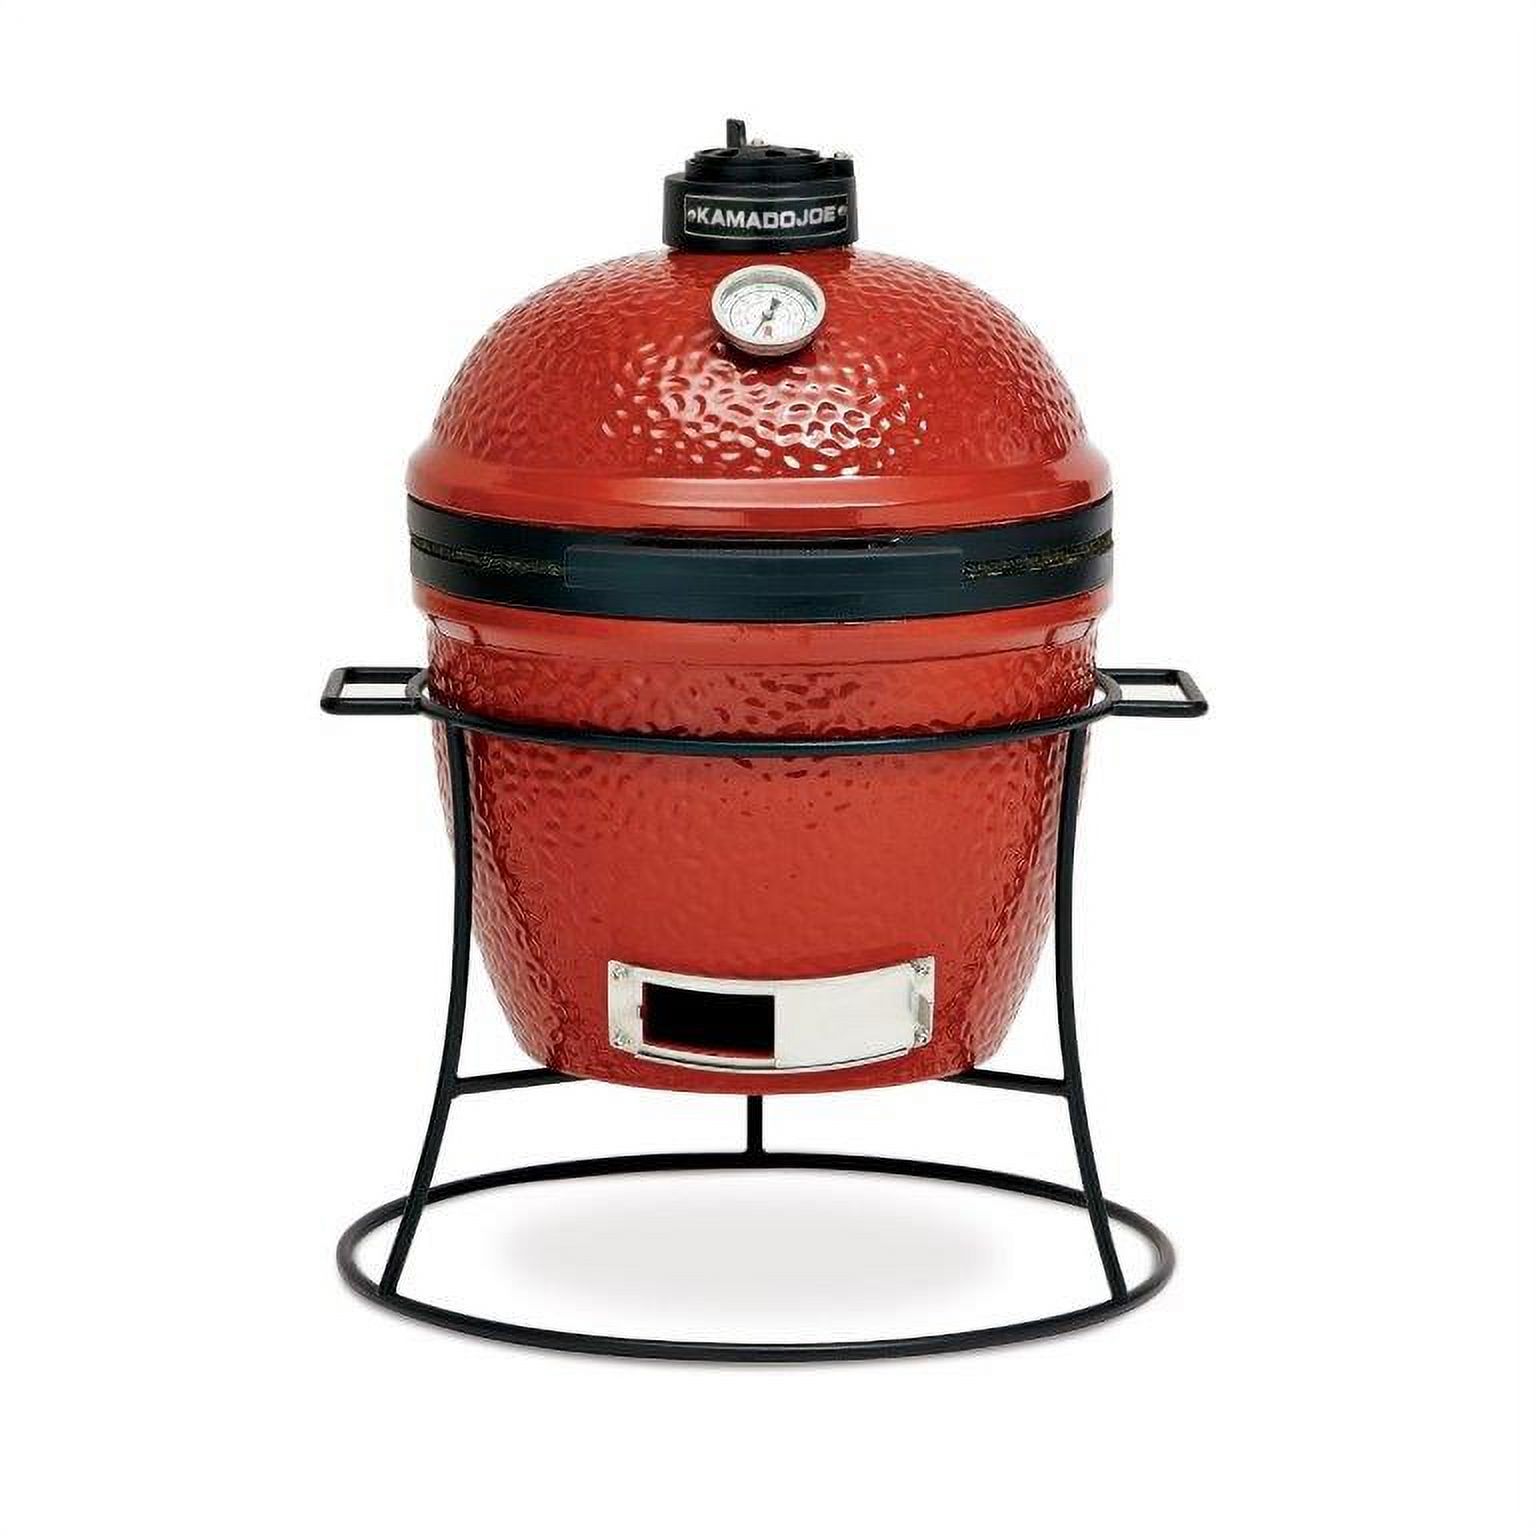 Joe Jr. 13.5 in. Portable Charcoal Grill in Red with Cast Iron Cart, Heat Deflectors and Ash Tool - image 1 of 11